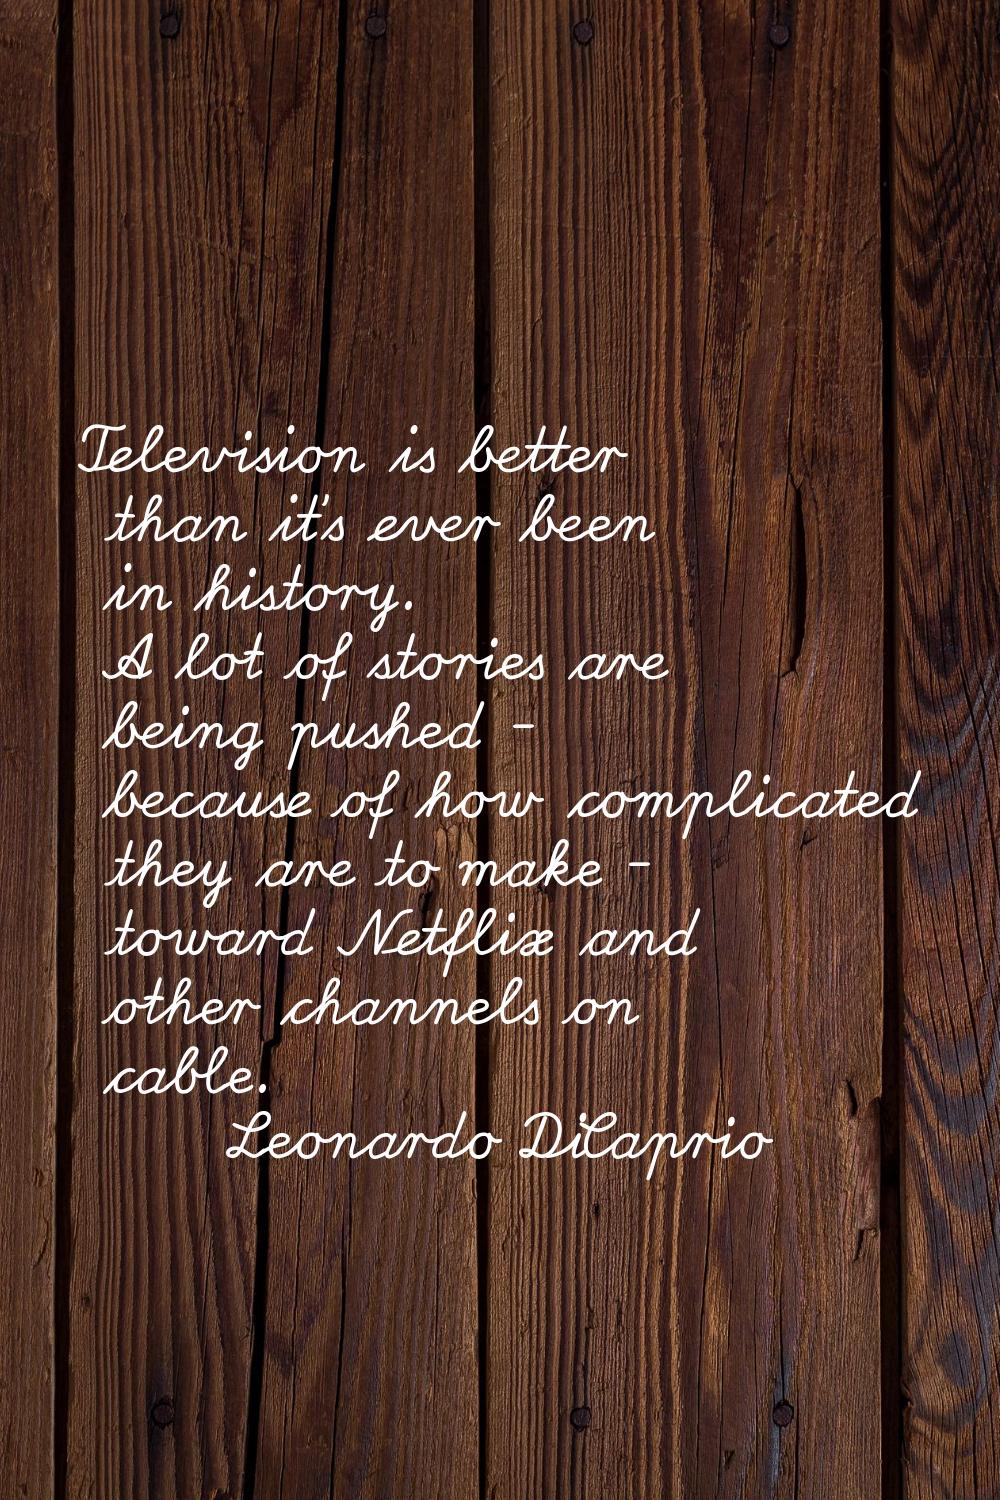 Television is better than it's ever been in history. A lot of stories are being pushed - because of